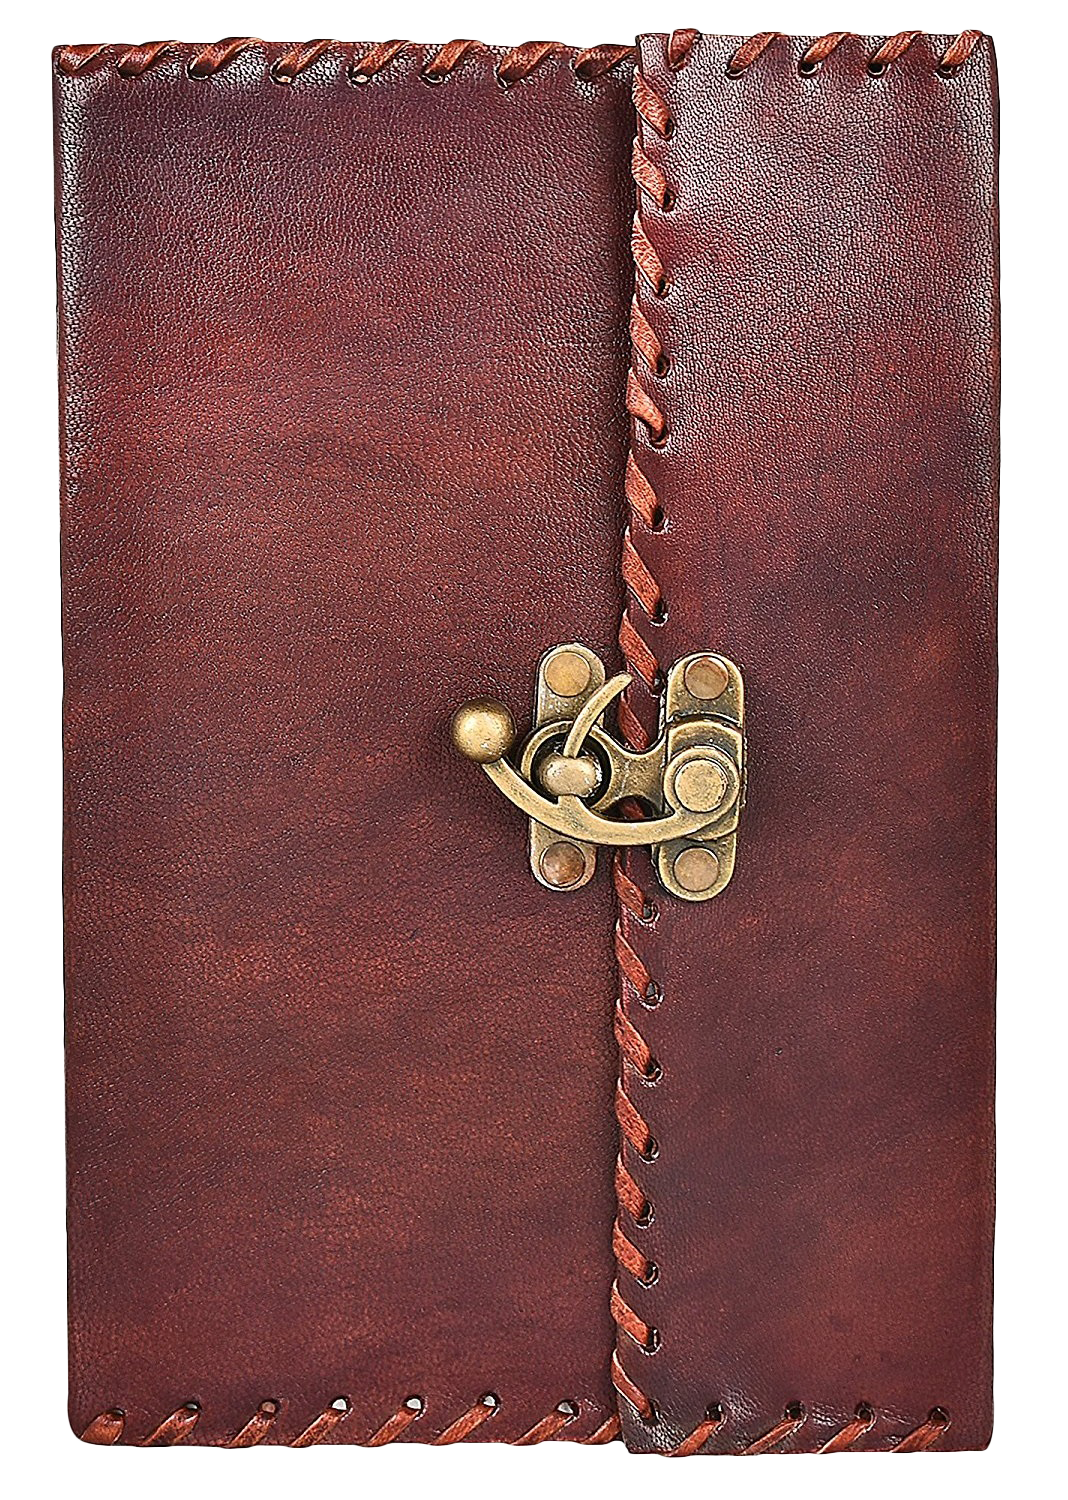 Download Vintage Leather Bound Journal - Rustic Town